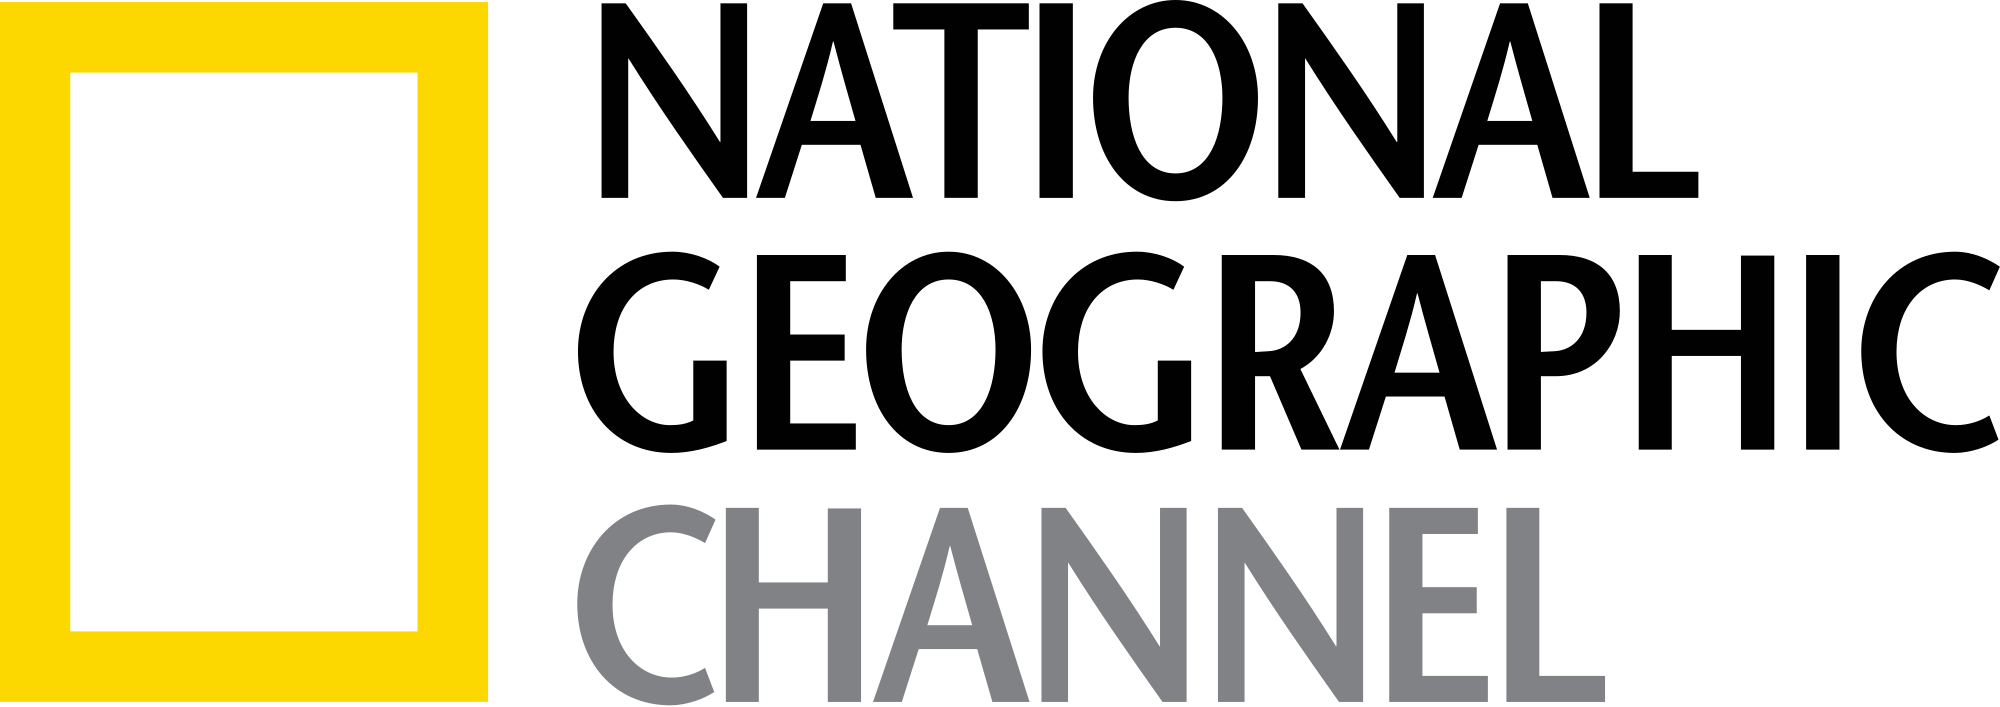 National Geographic Society Channel Logo - File:National Geographic Channel.svg - Wikimedia Commons